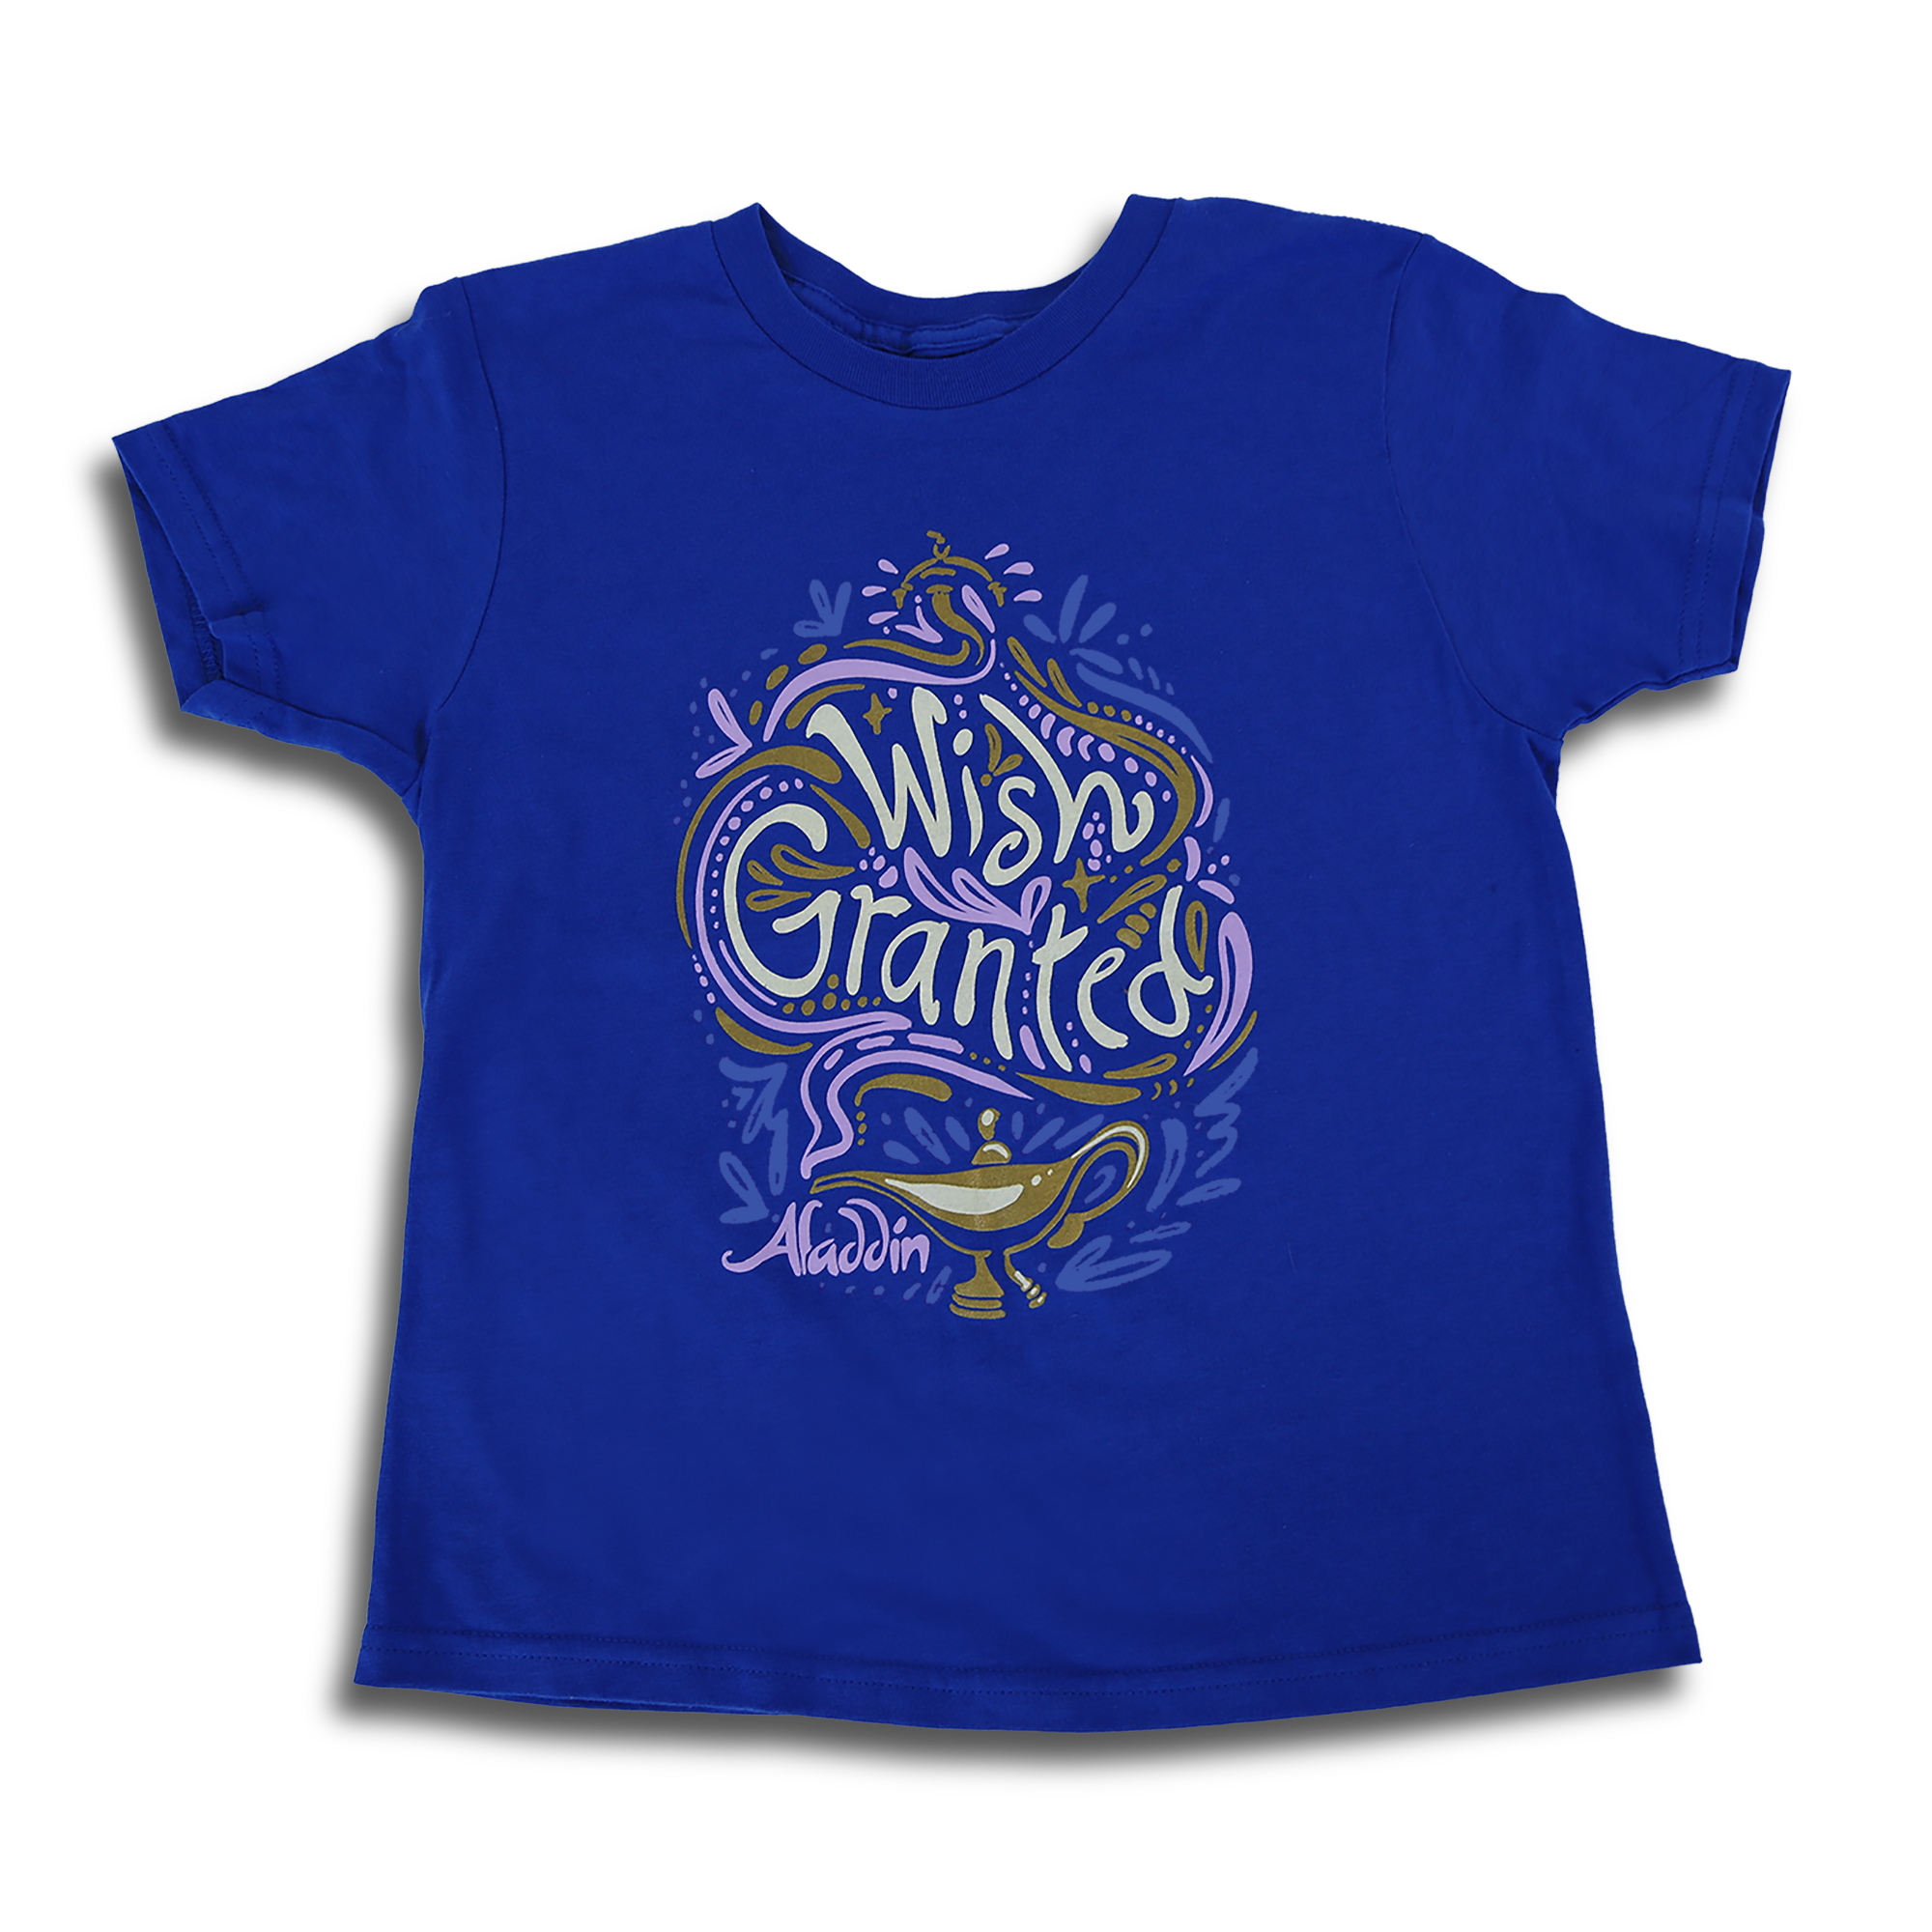 Aladdin the Broadway Musical - Wish Granted Youth Tee